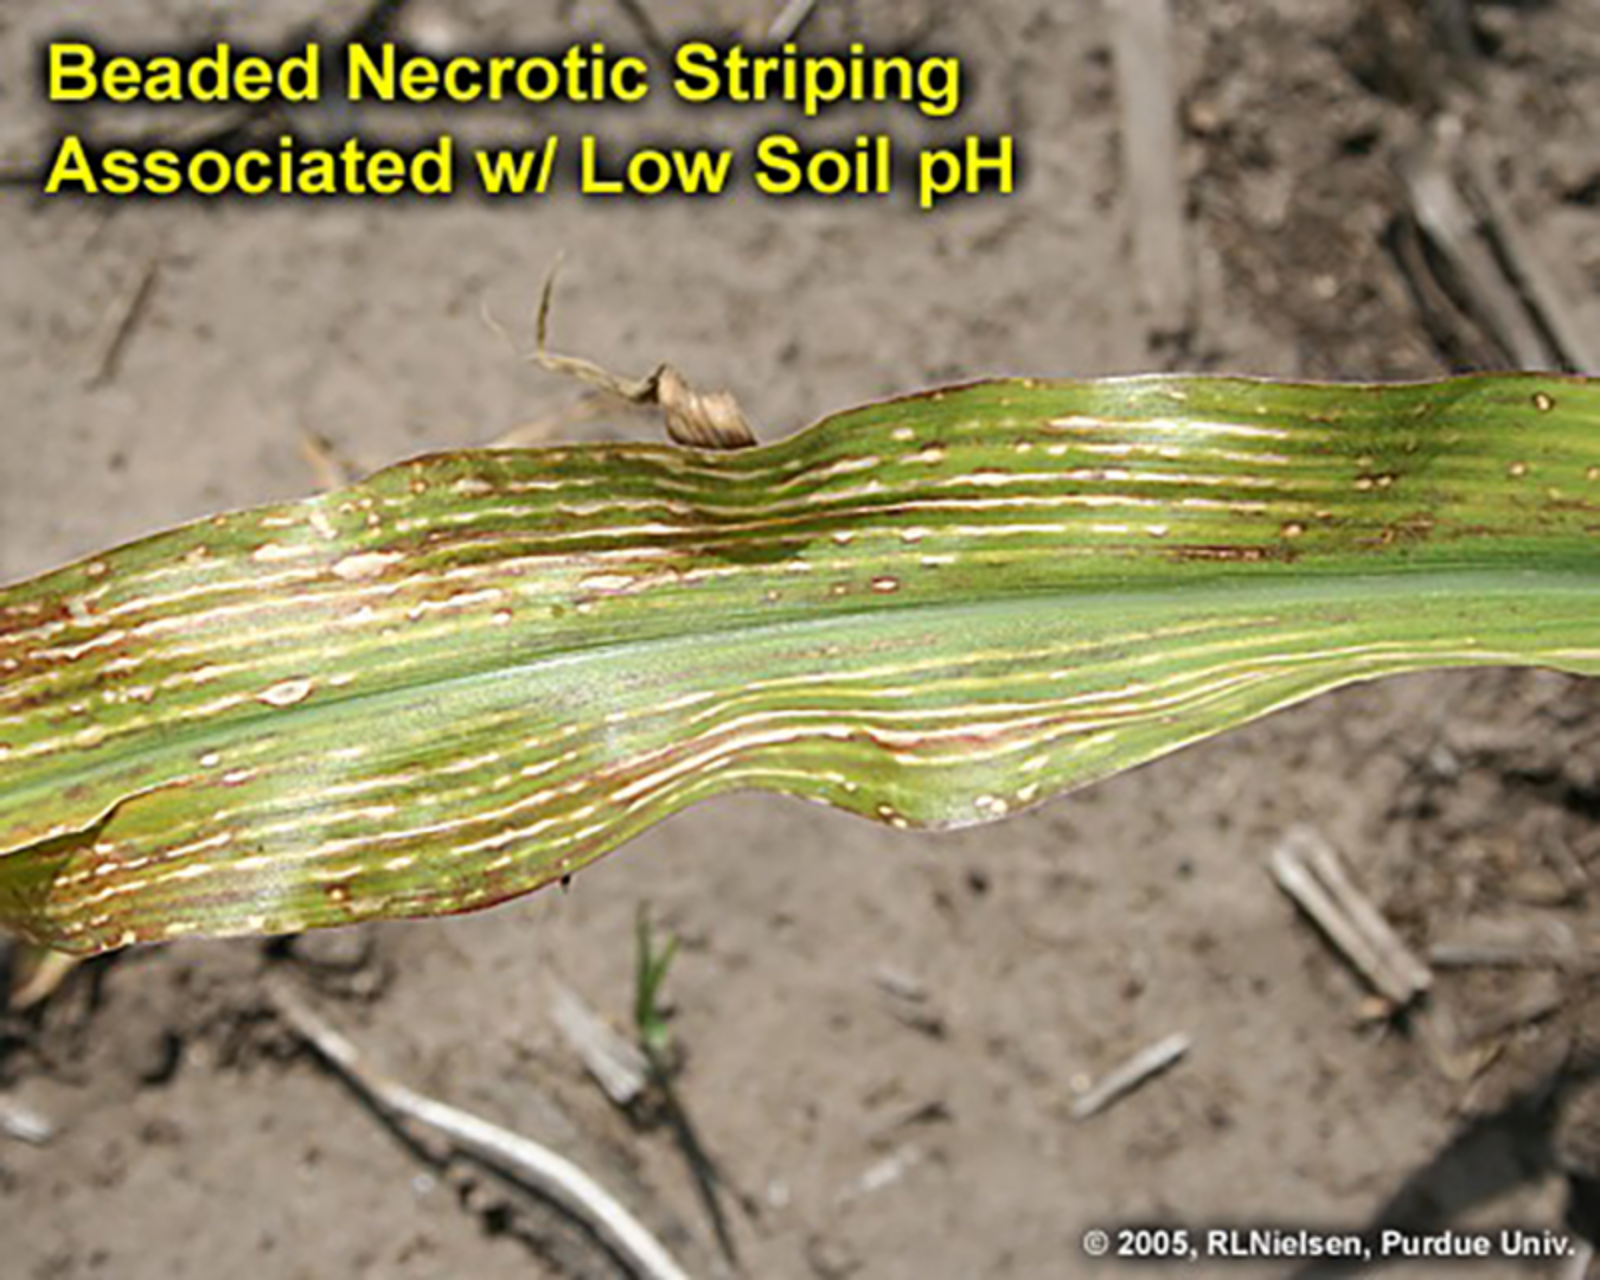 beaded necrotic striping associated with low soil ph